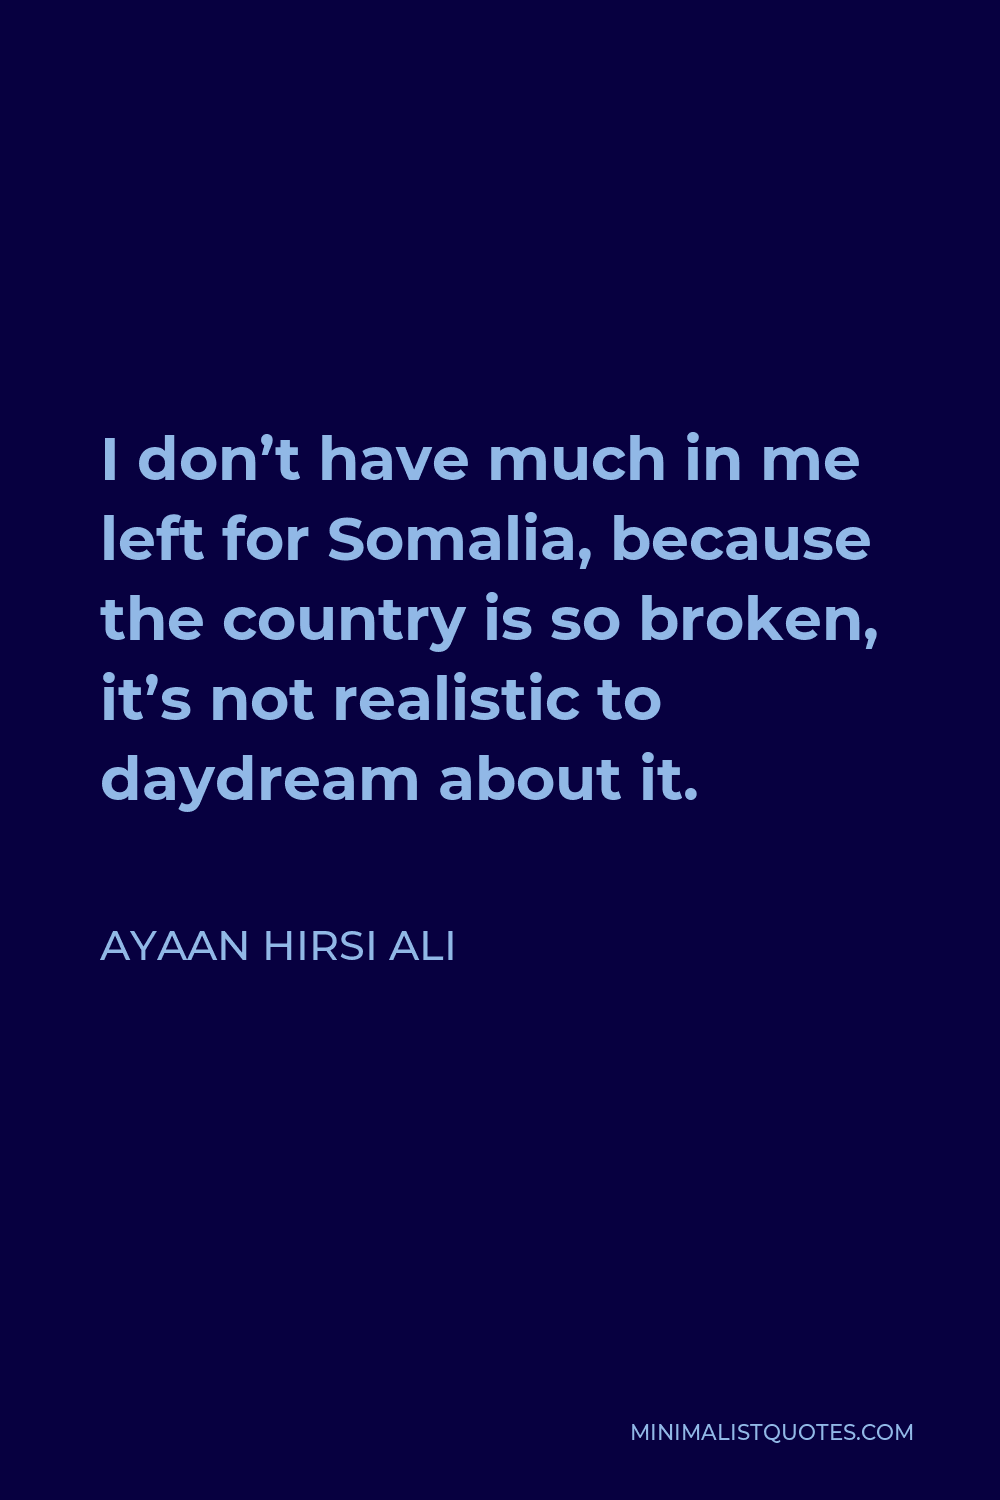 Ayaan Hirsi Ali Quote - I don’t have much in me left for Somalia, because the country is so broken, it’s not realistic to daydream about it.